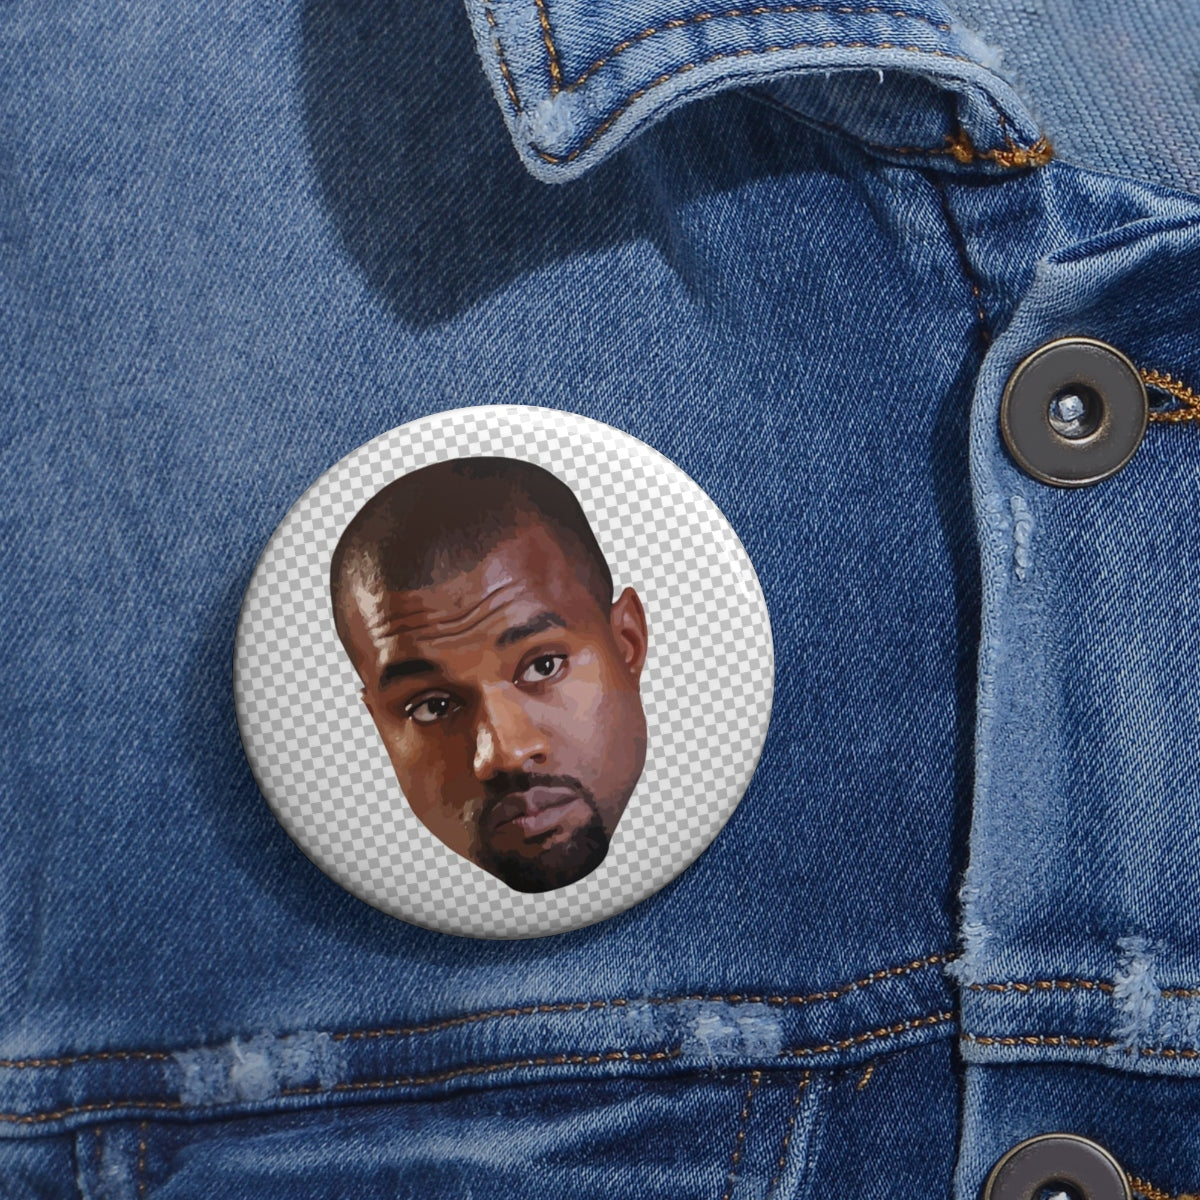 Kanye West Meme Face Pin Buttons